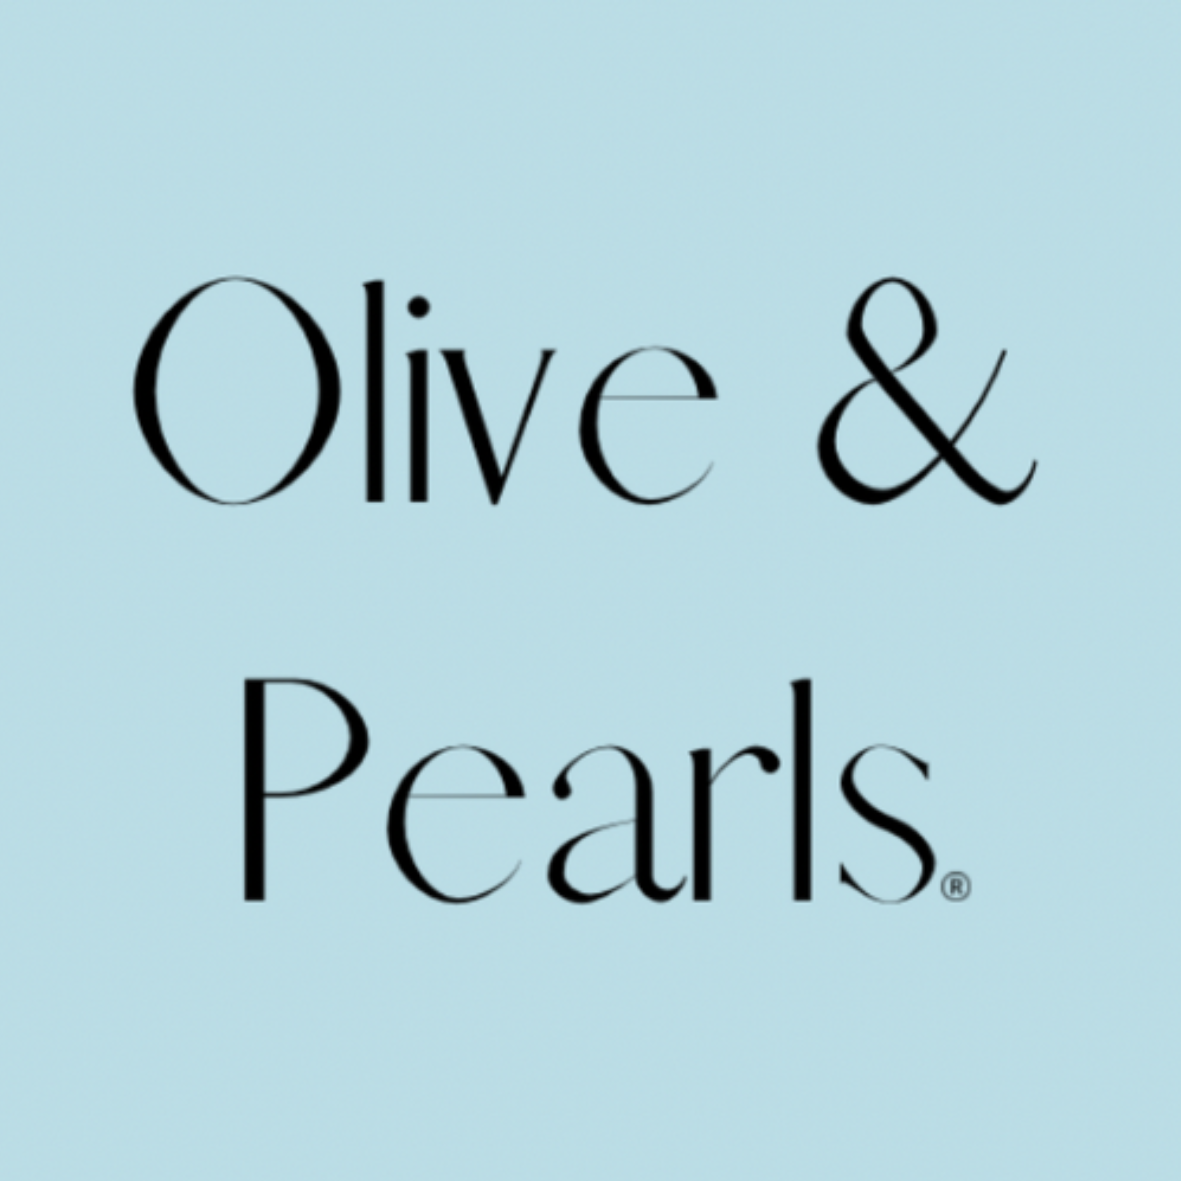 Olive & Pearls Gift Card